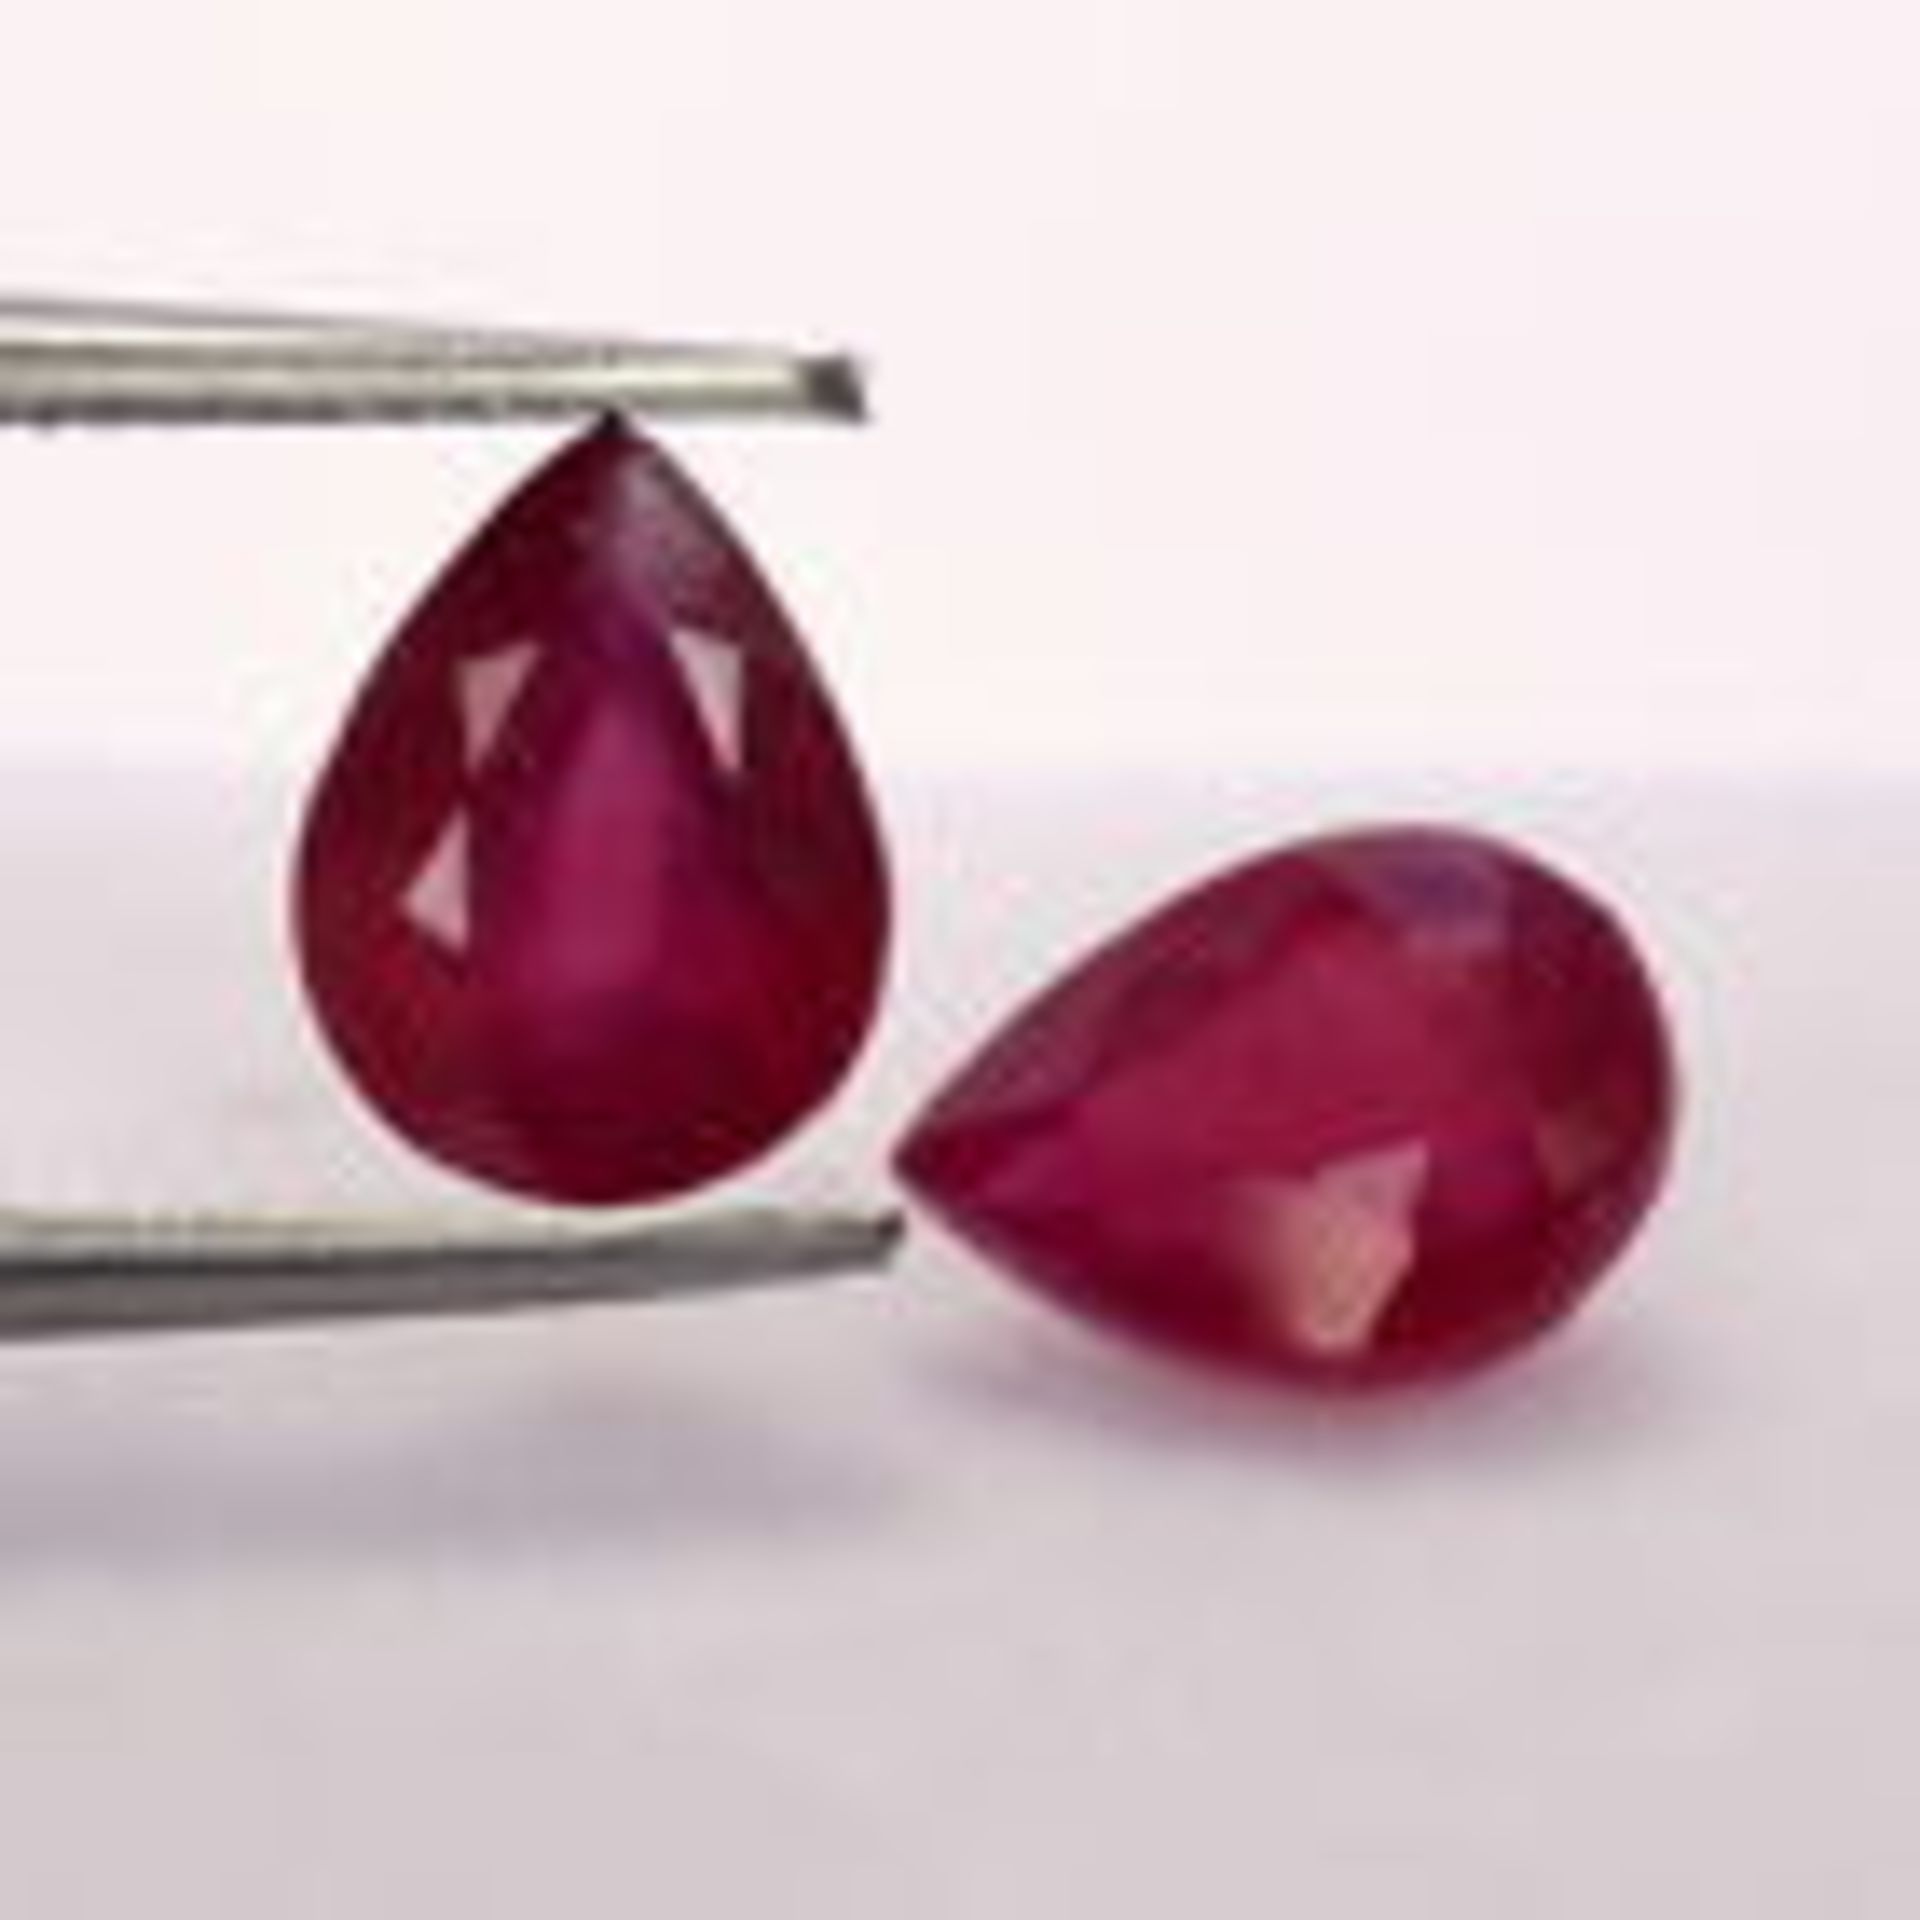 Natural pair 7x5 red ruby 1.87 ct - Image 2 of 2